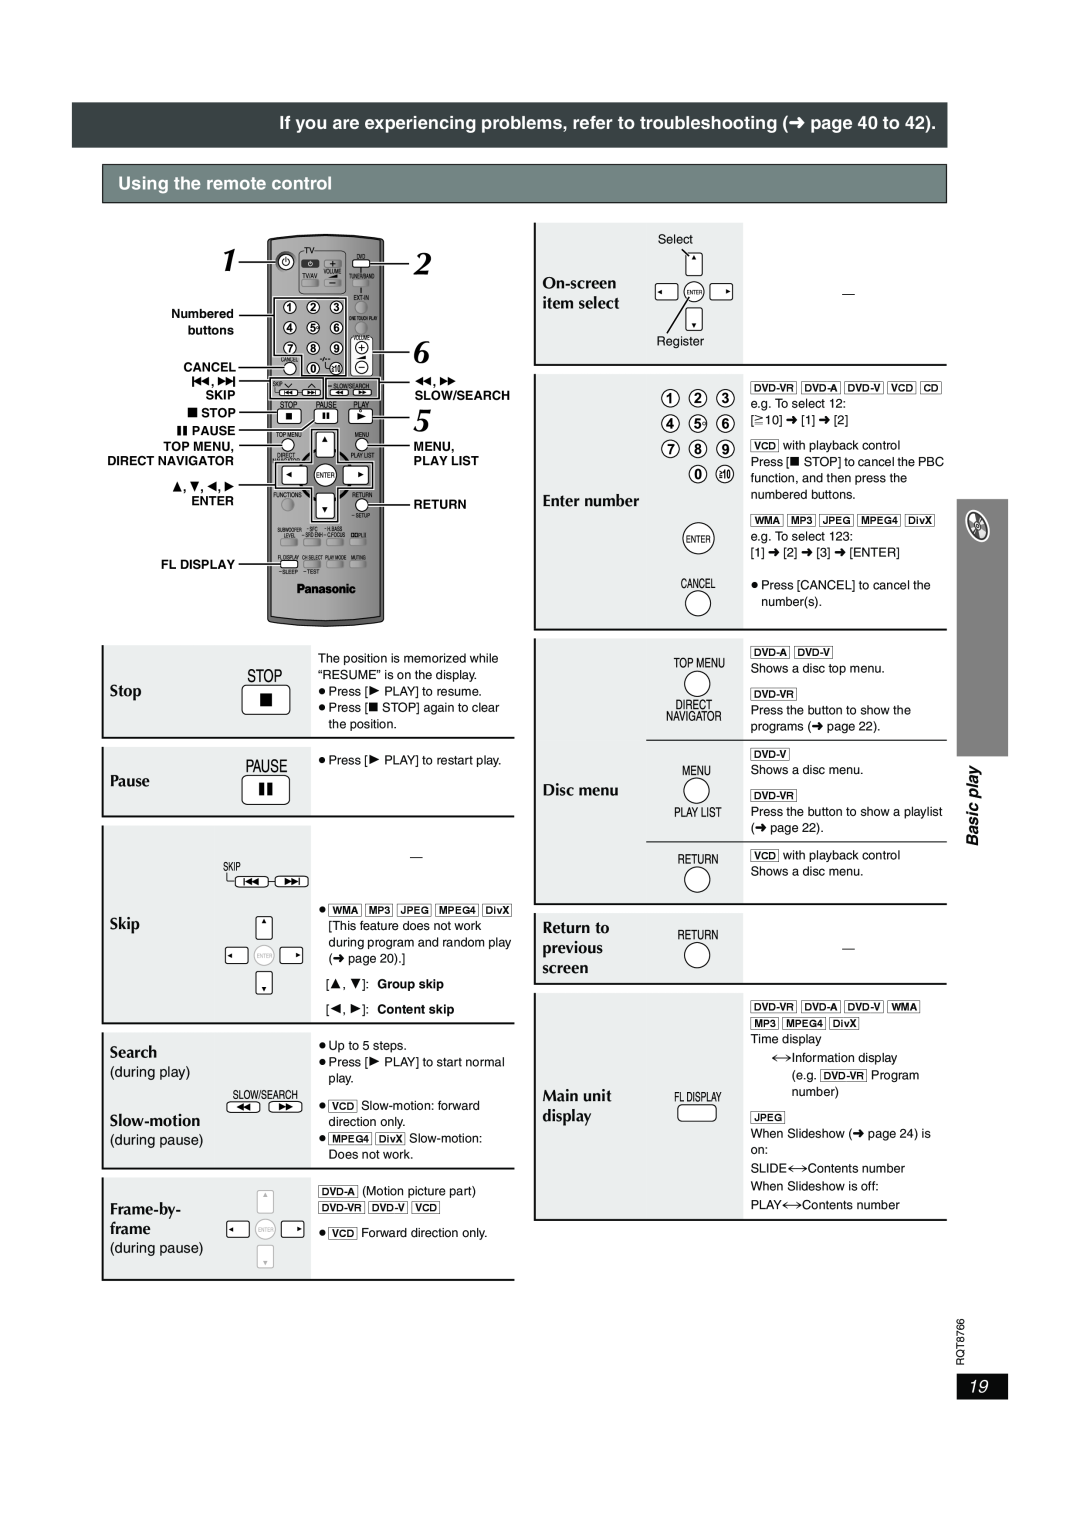 Panasonic SC-HT995W operating instructions Using the remote control, play 